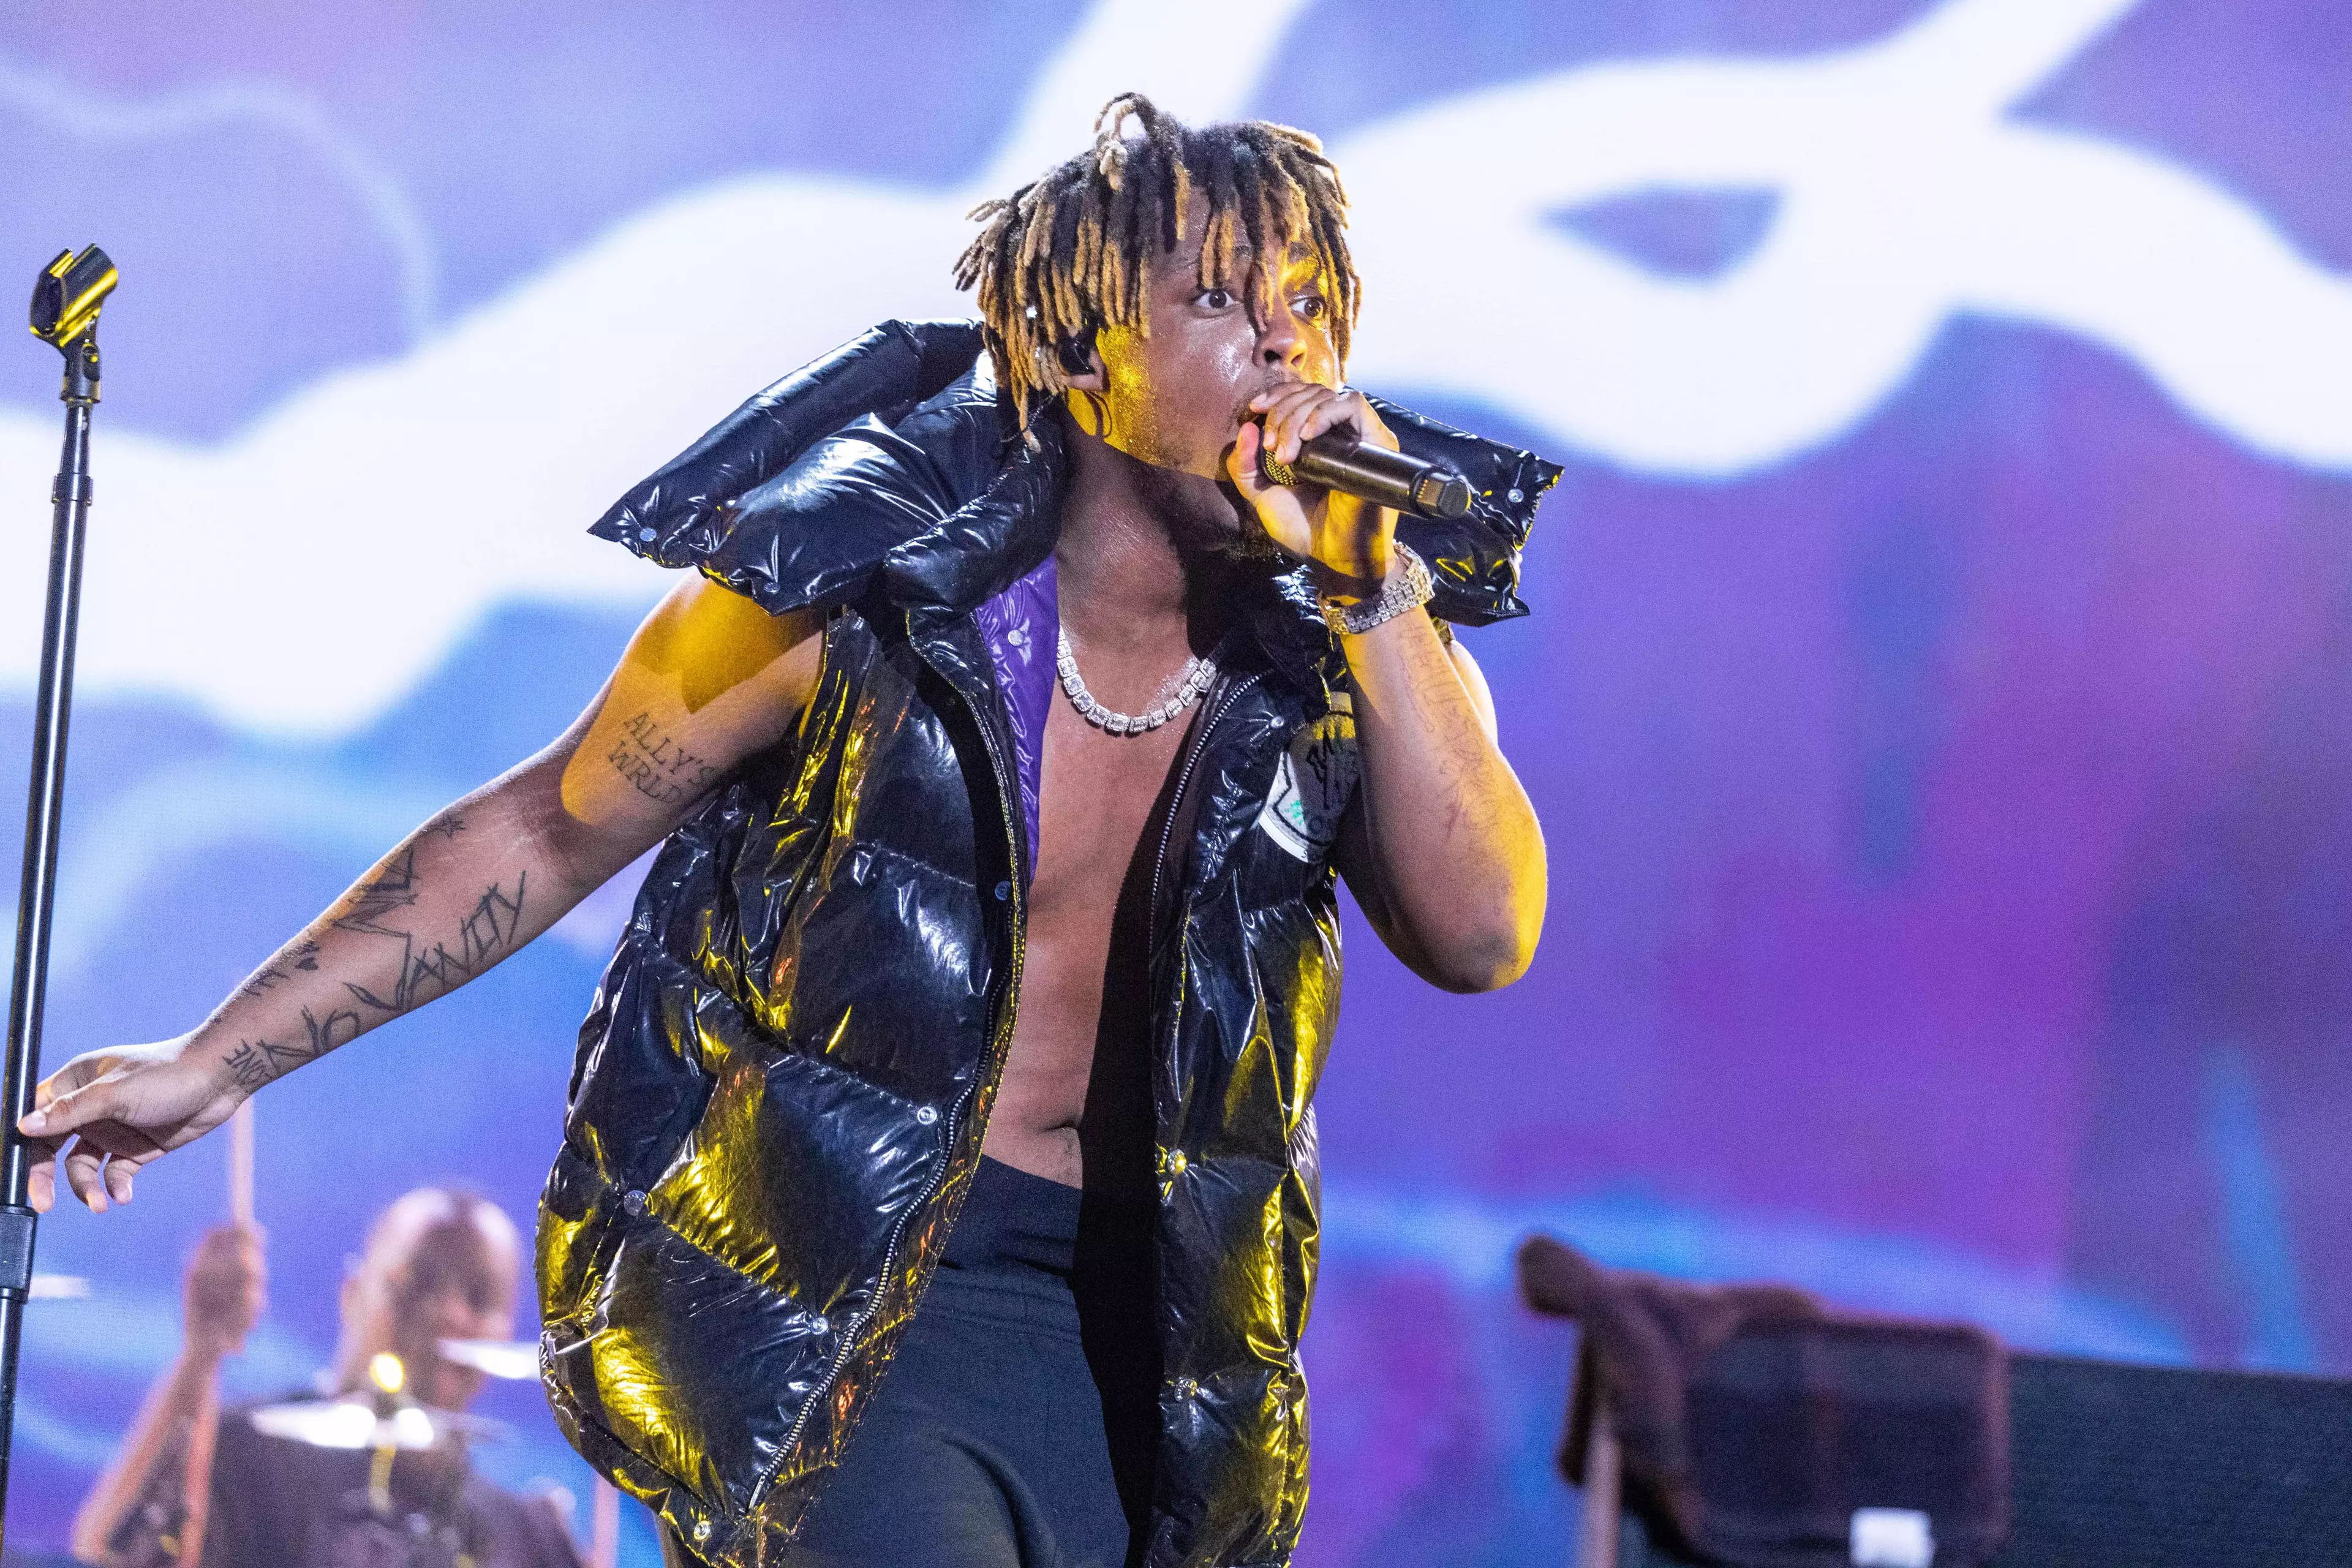 Juice Wrld passed away at the age of 21.